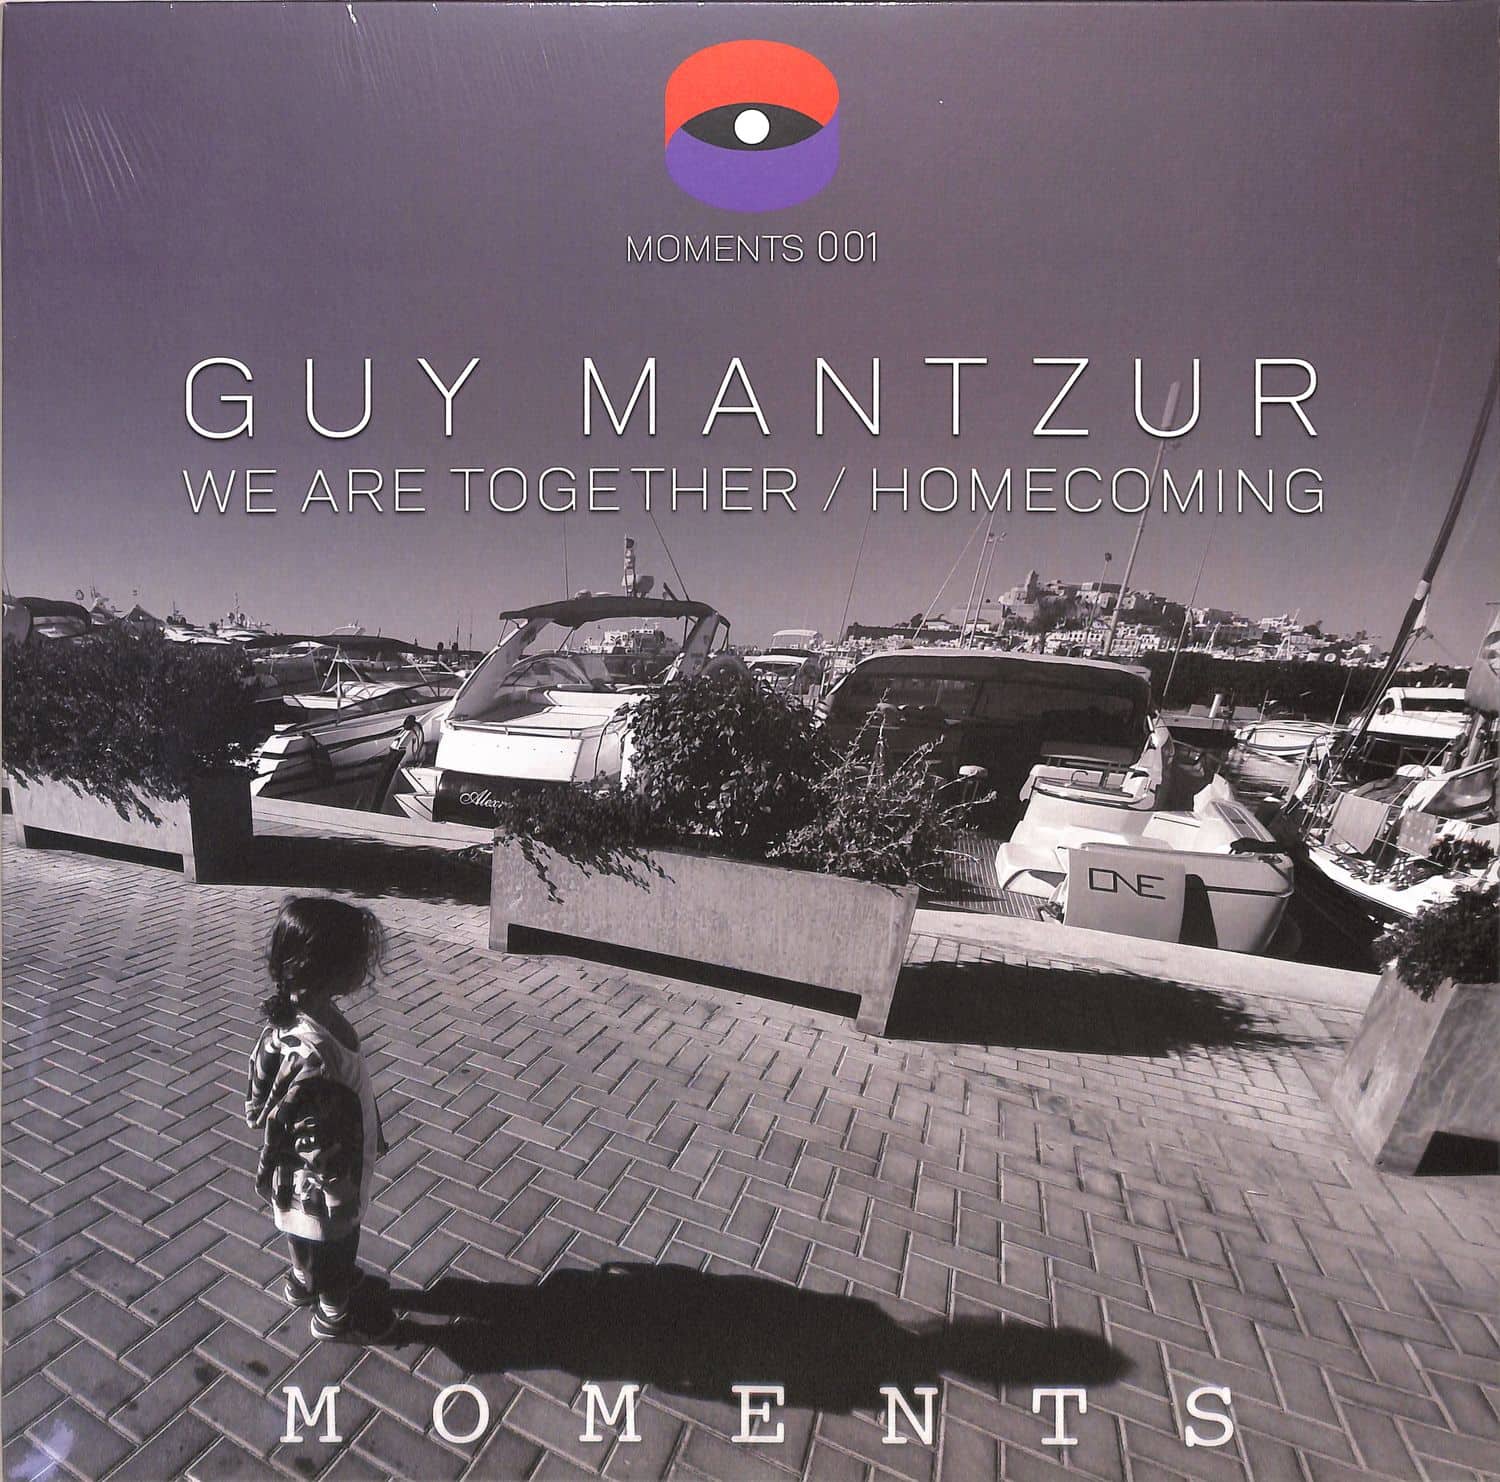 Guy Mantzur - WE ARE TOGETHER / HOMECOMING